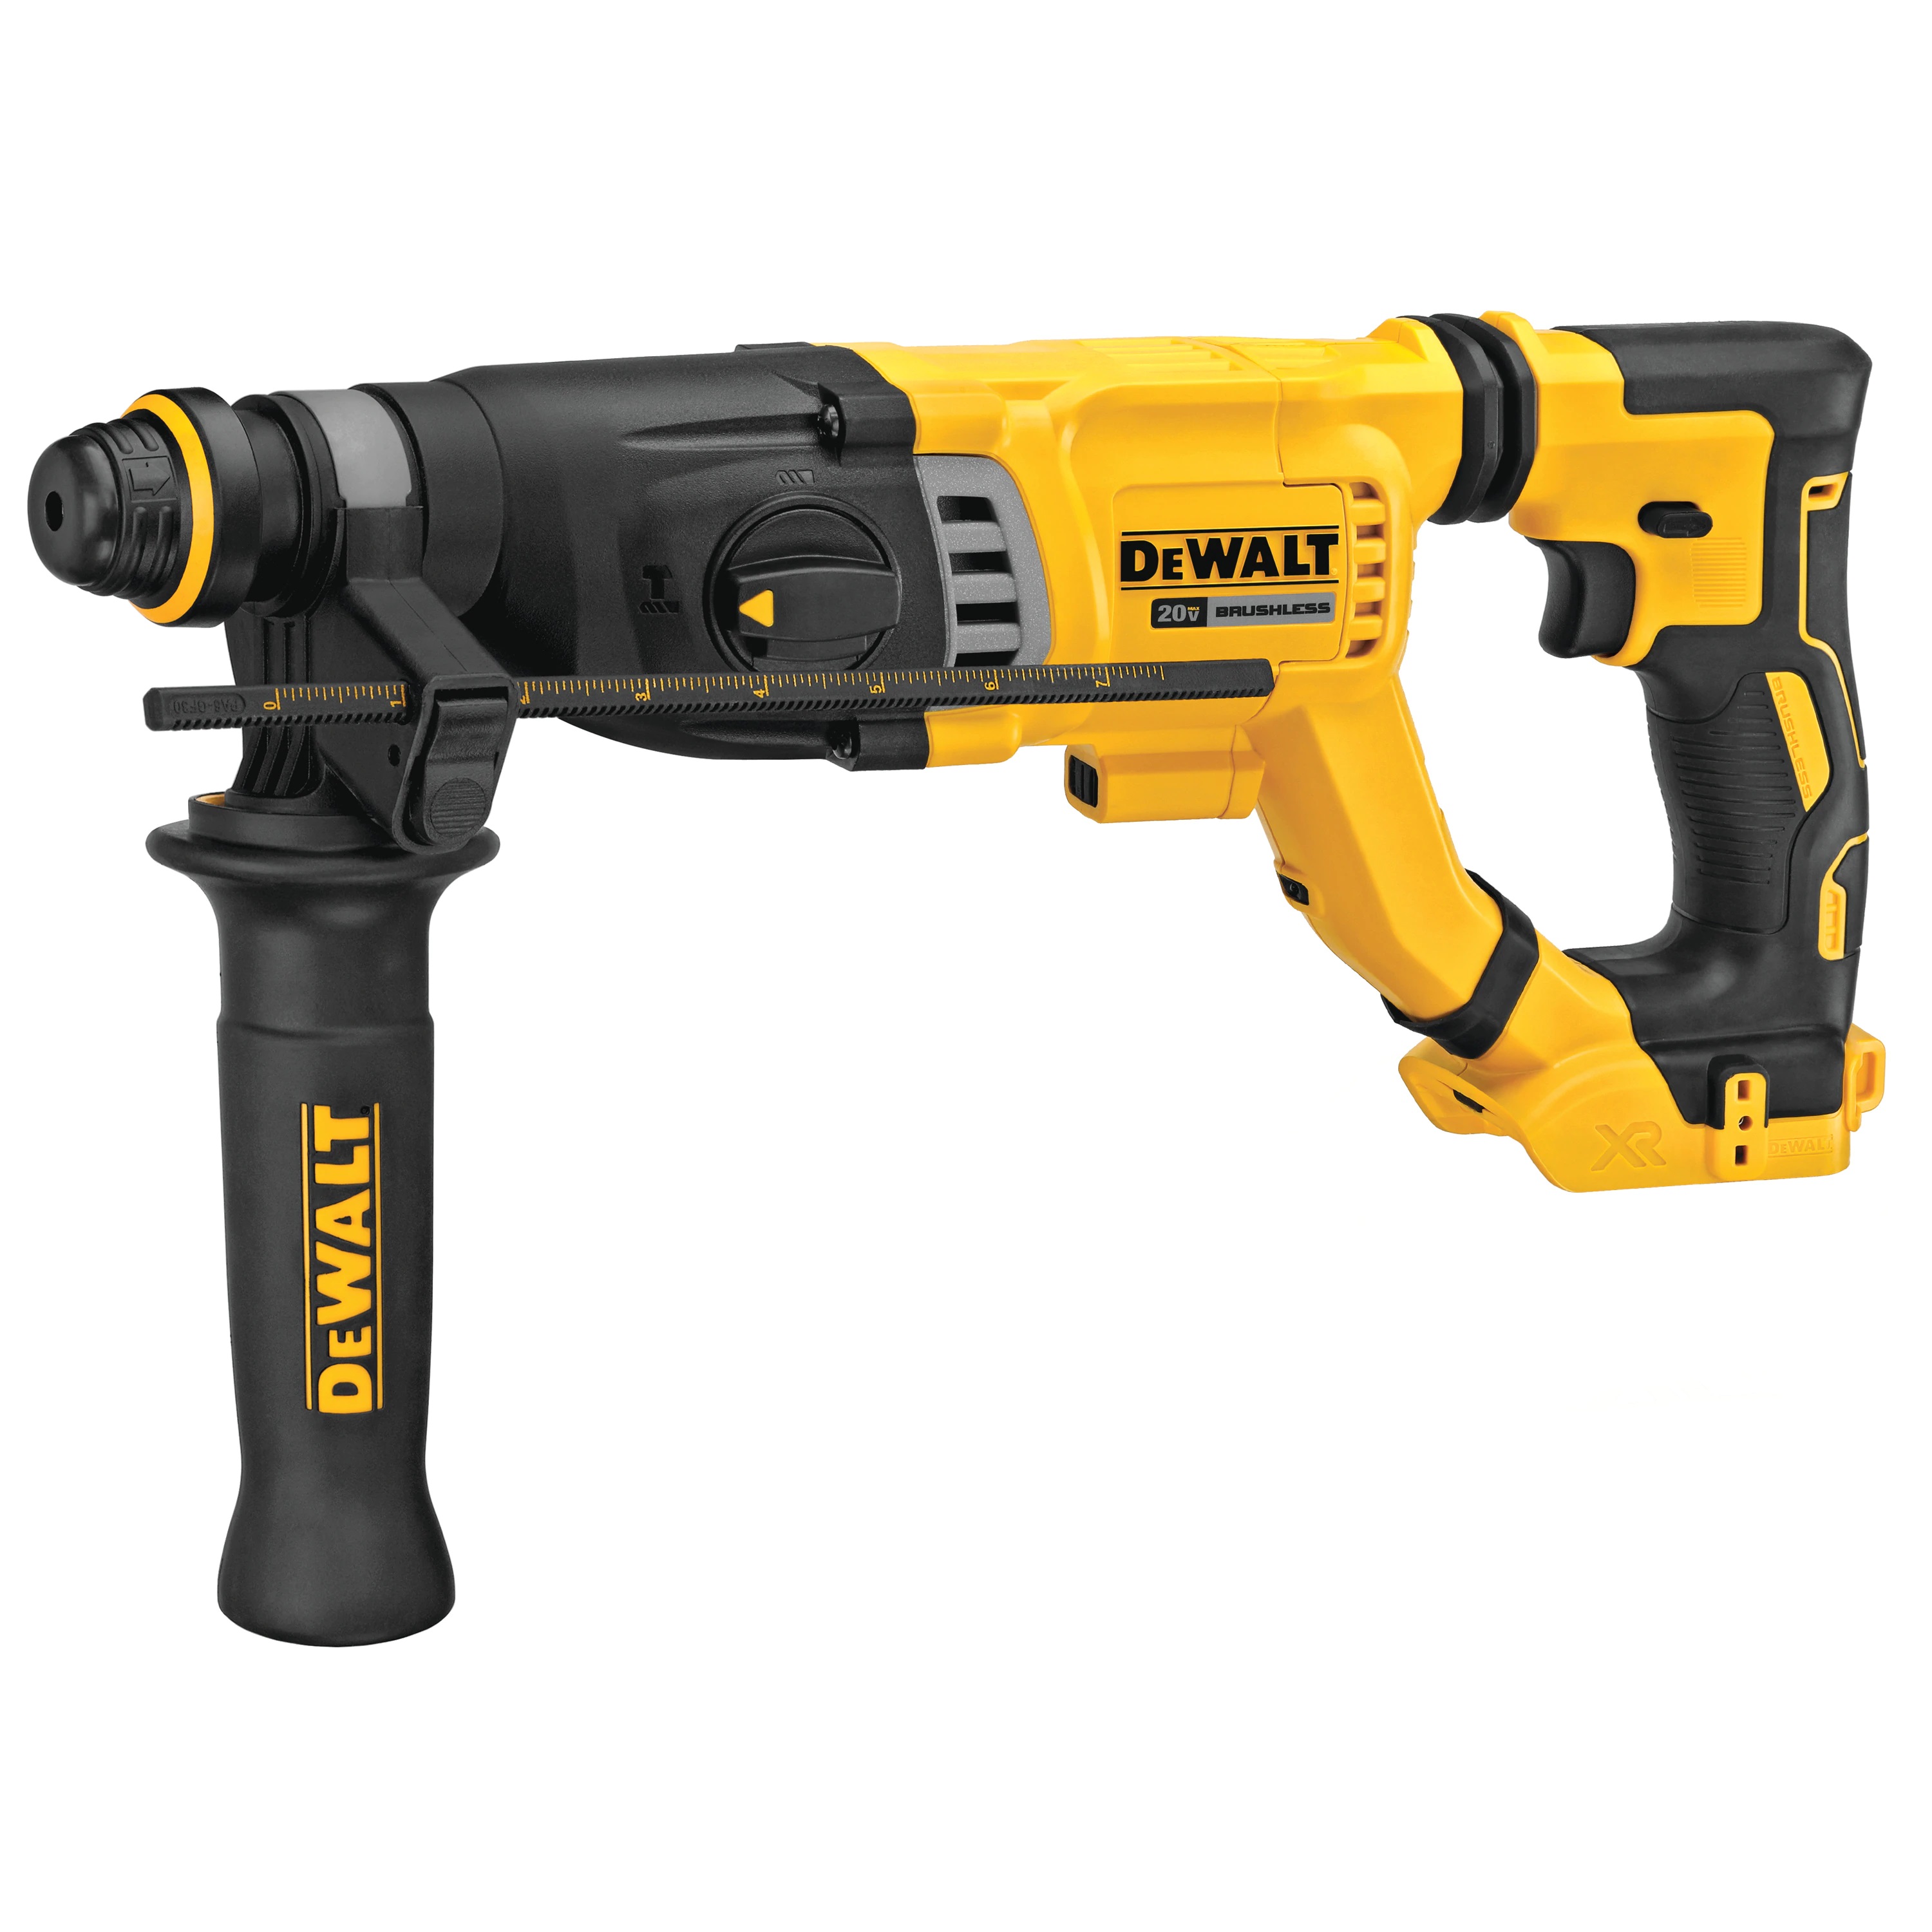 Hammer Drill - 20V MAX* 1-1/8 IN. Brushless Cordless SDS Plus D-Handle (TOOL ONLY) - Rotary & Demolition Hammer Drills